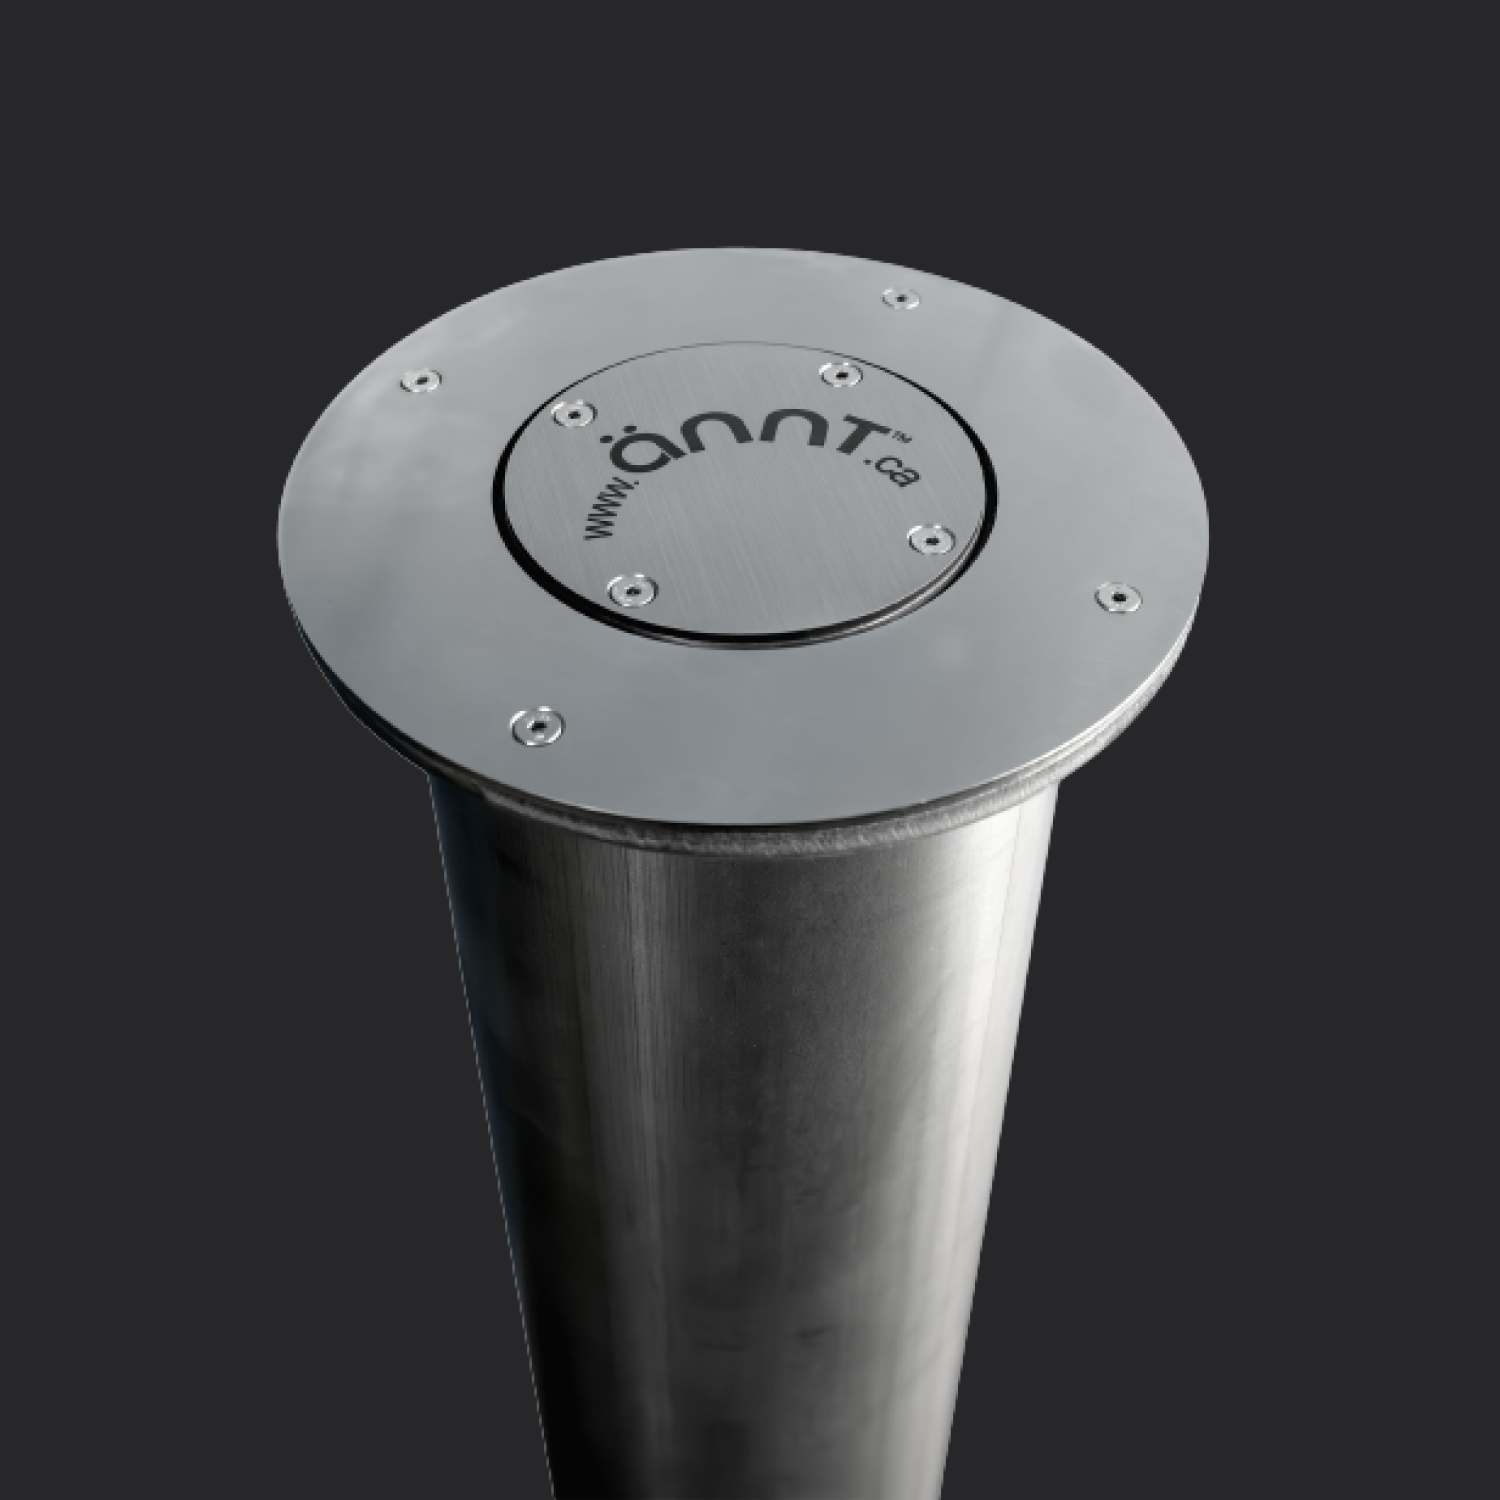 Stainless Steel Automatic Retractable Bollard - Available Spring 2024